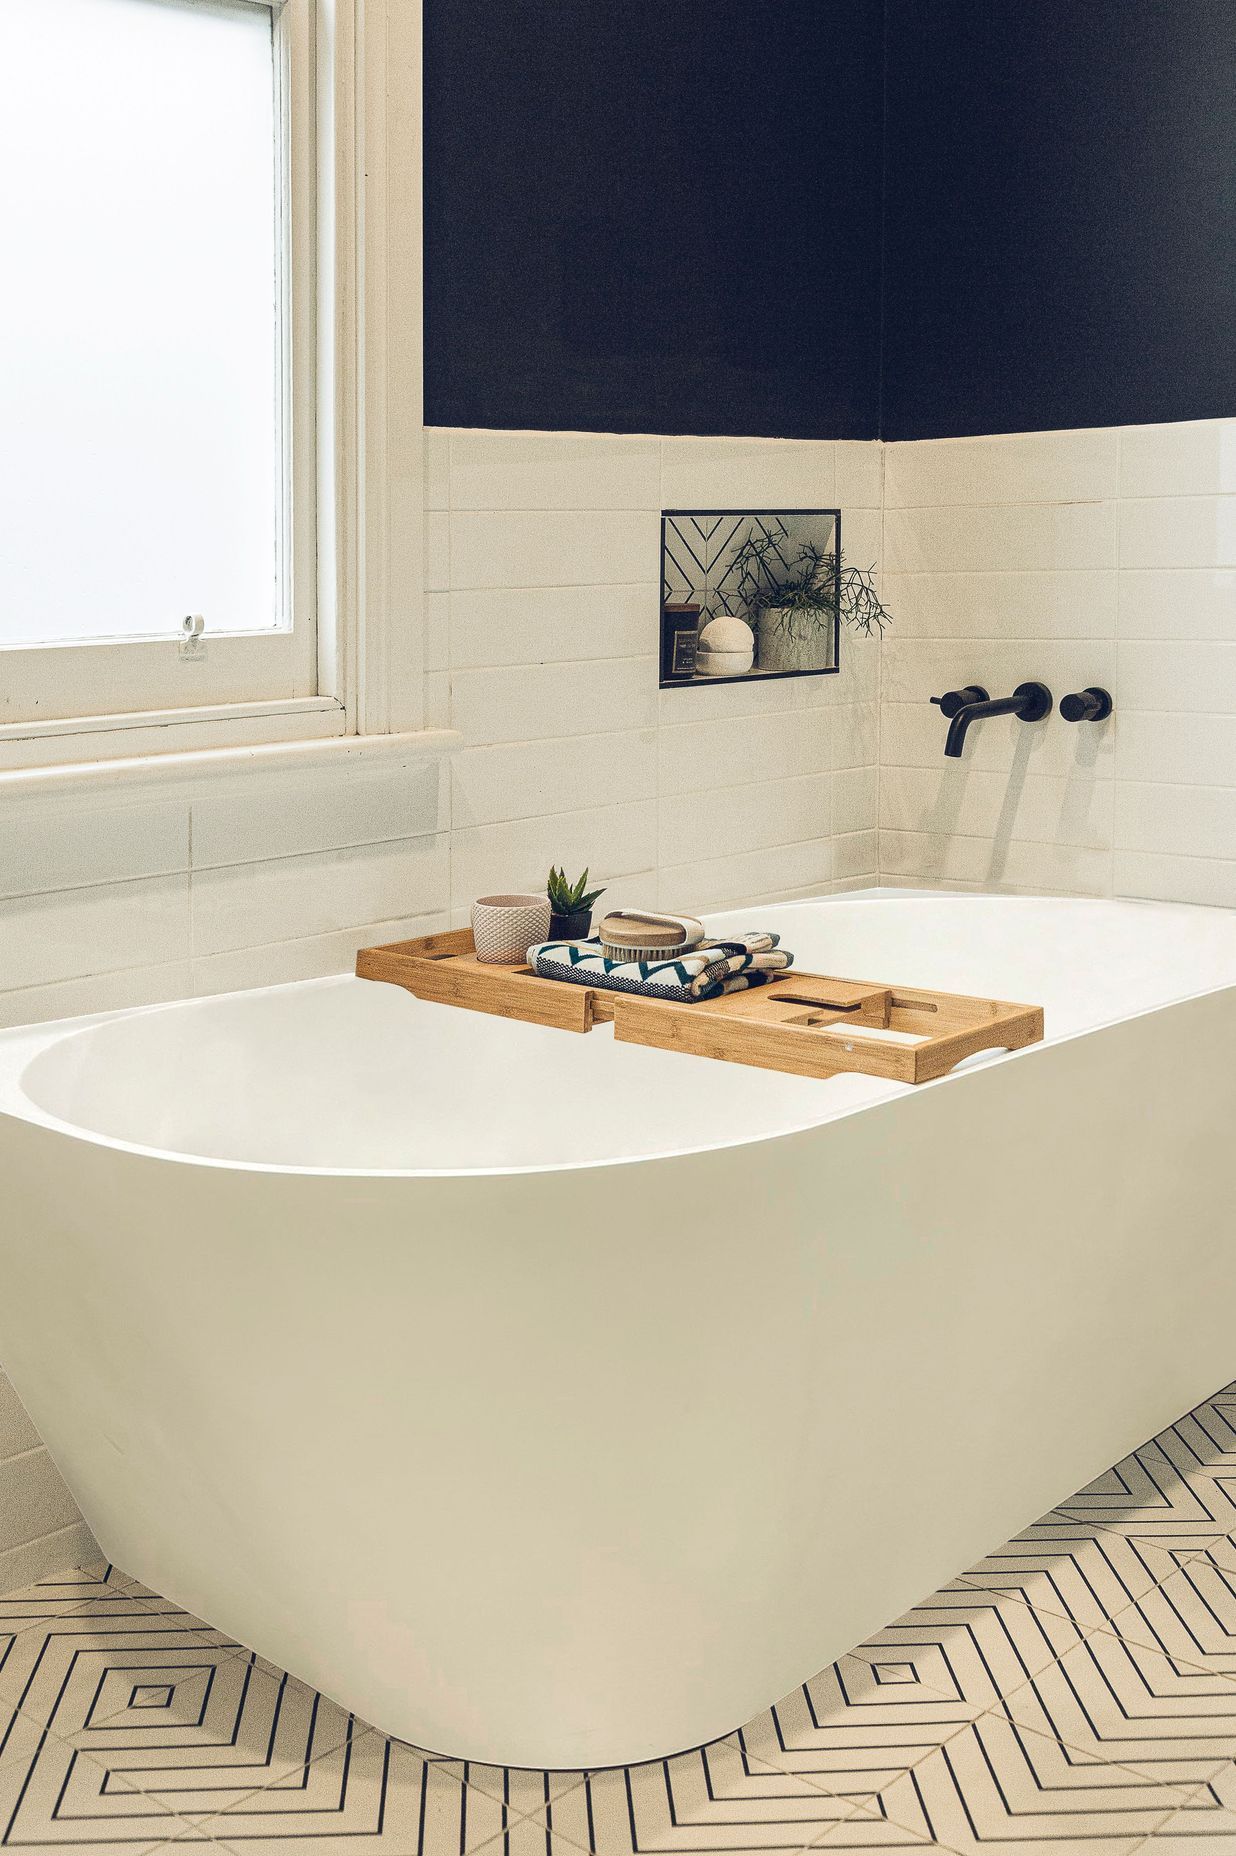 The new 1600mm x 800mm back-to-wall-style, free-standing corner bath from Elite Bathroomware is ideal for smaller bathrooms where the look of a free-standing bath is desired but space is of a premium.